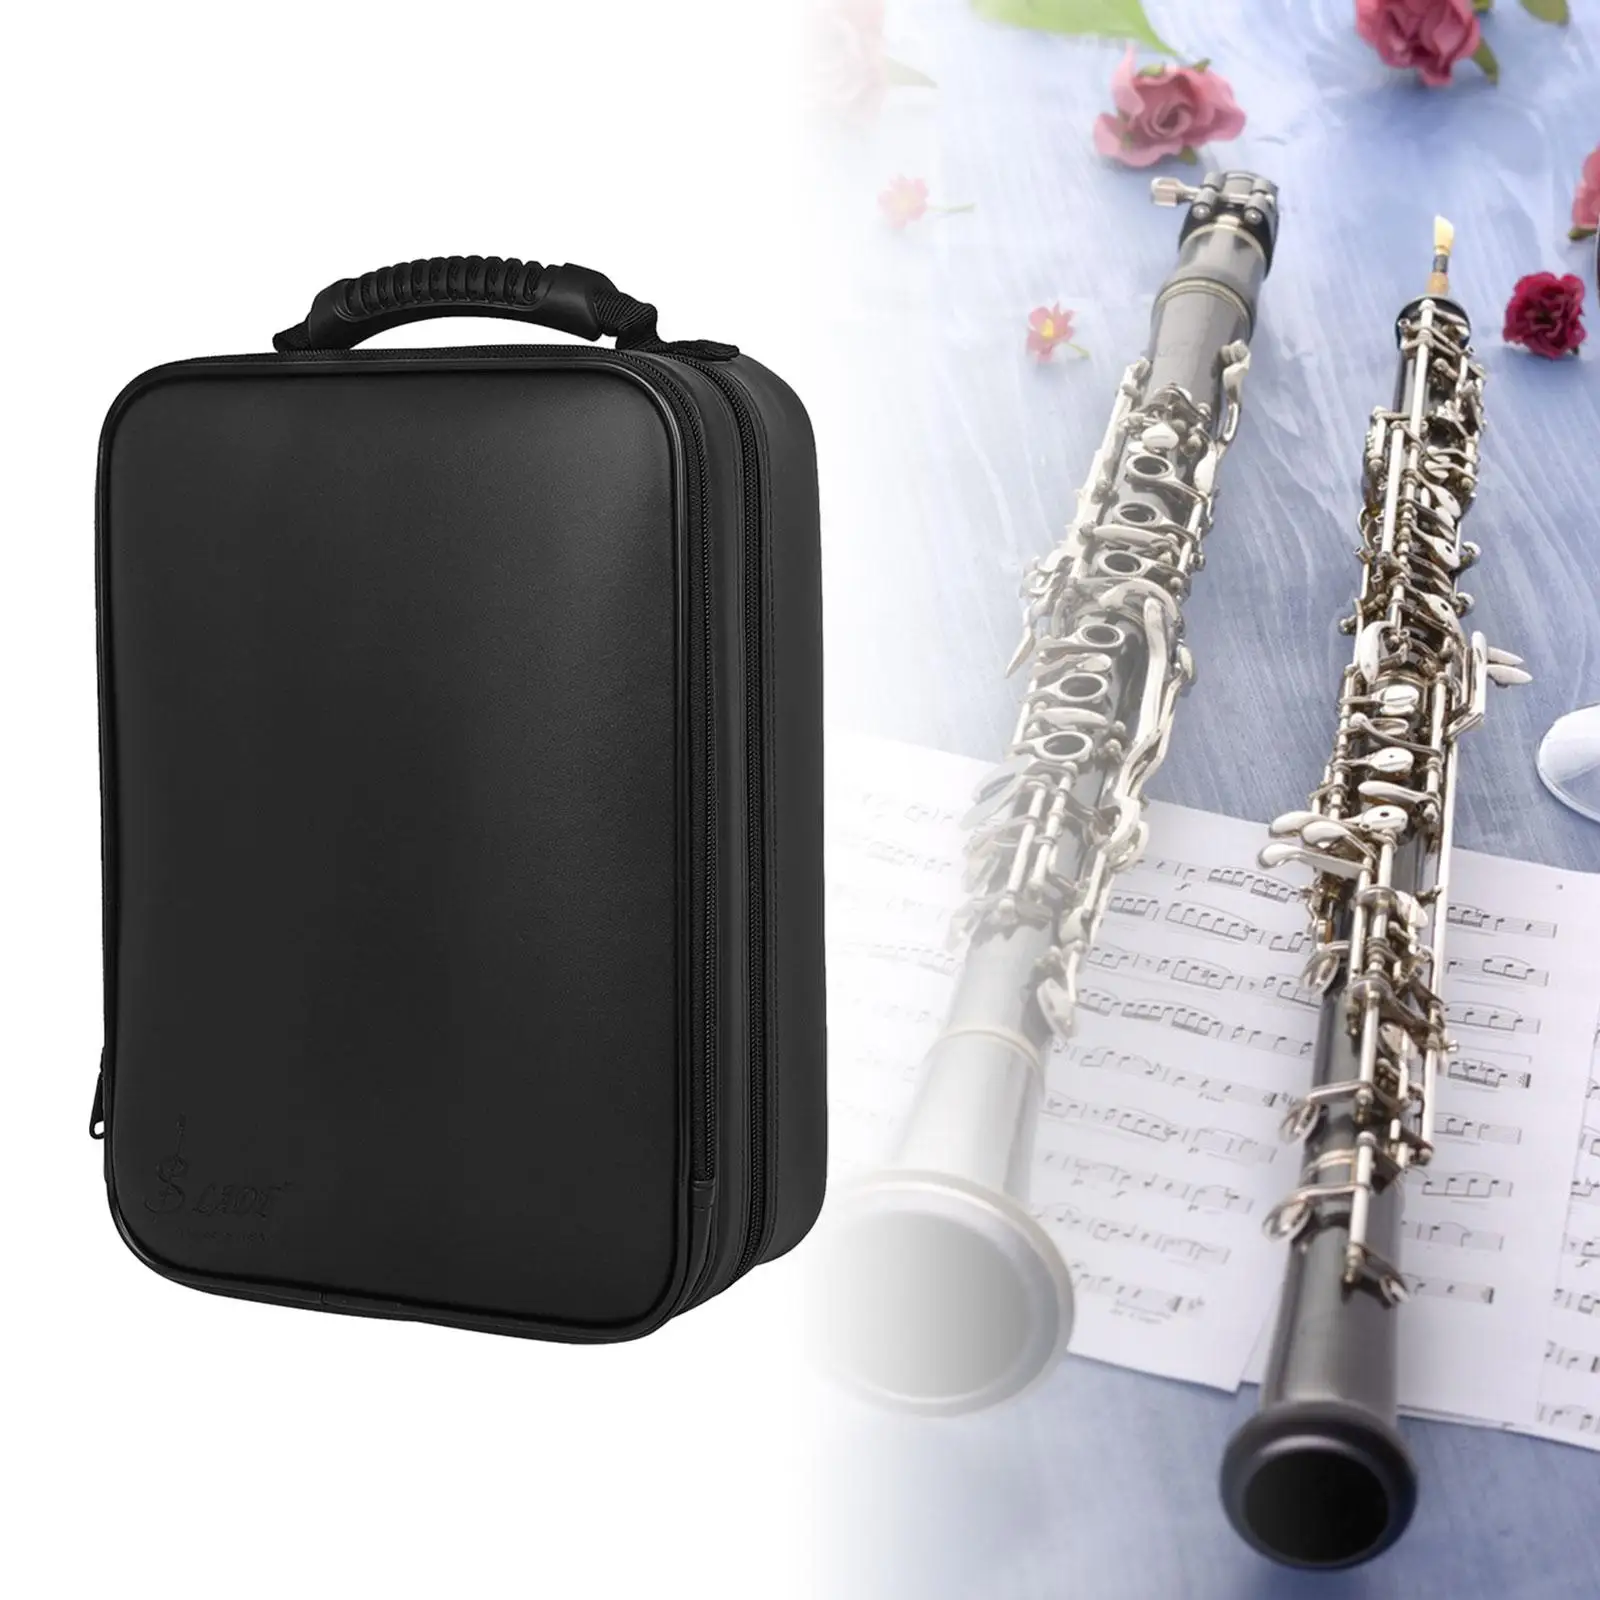 Clarinet Storage Case with Shoulder Strap, Musical Instrument Storage Bag, Durable PU Leather Clarinet Bag for Outdoor